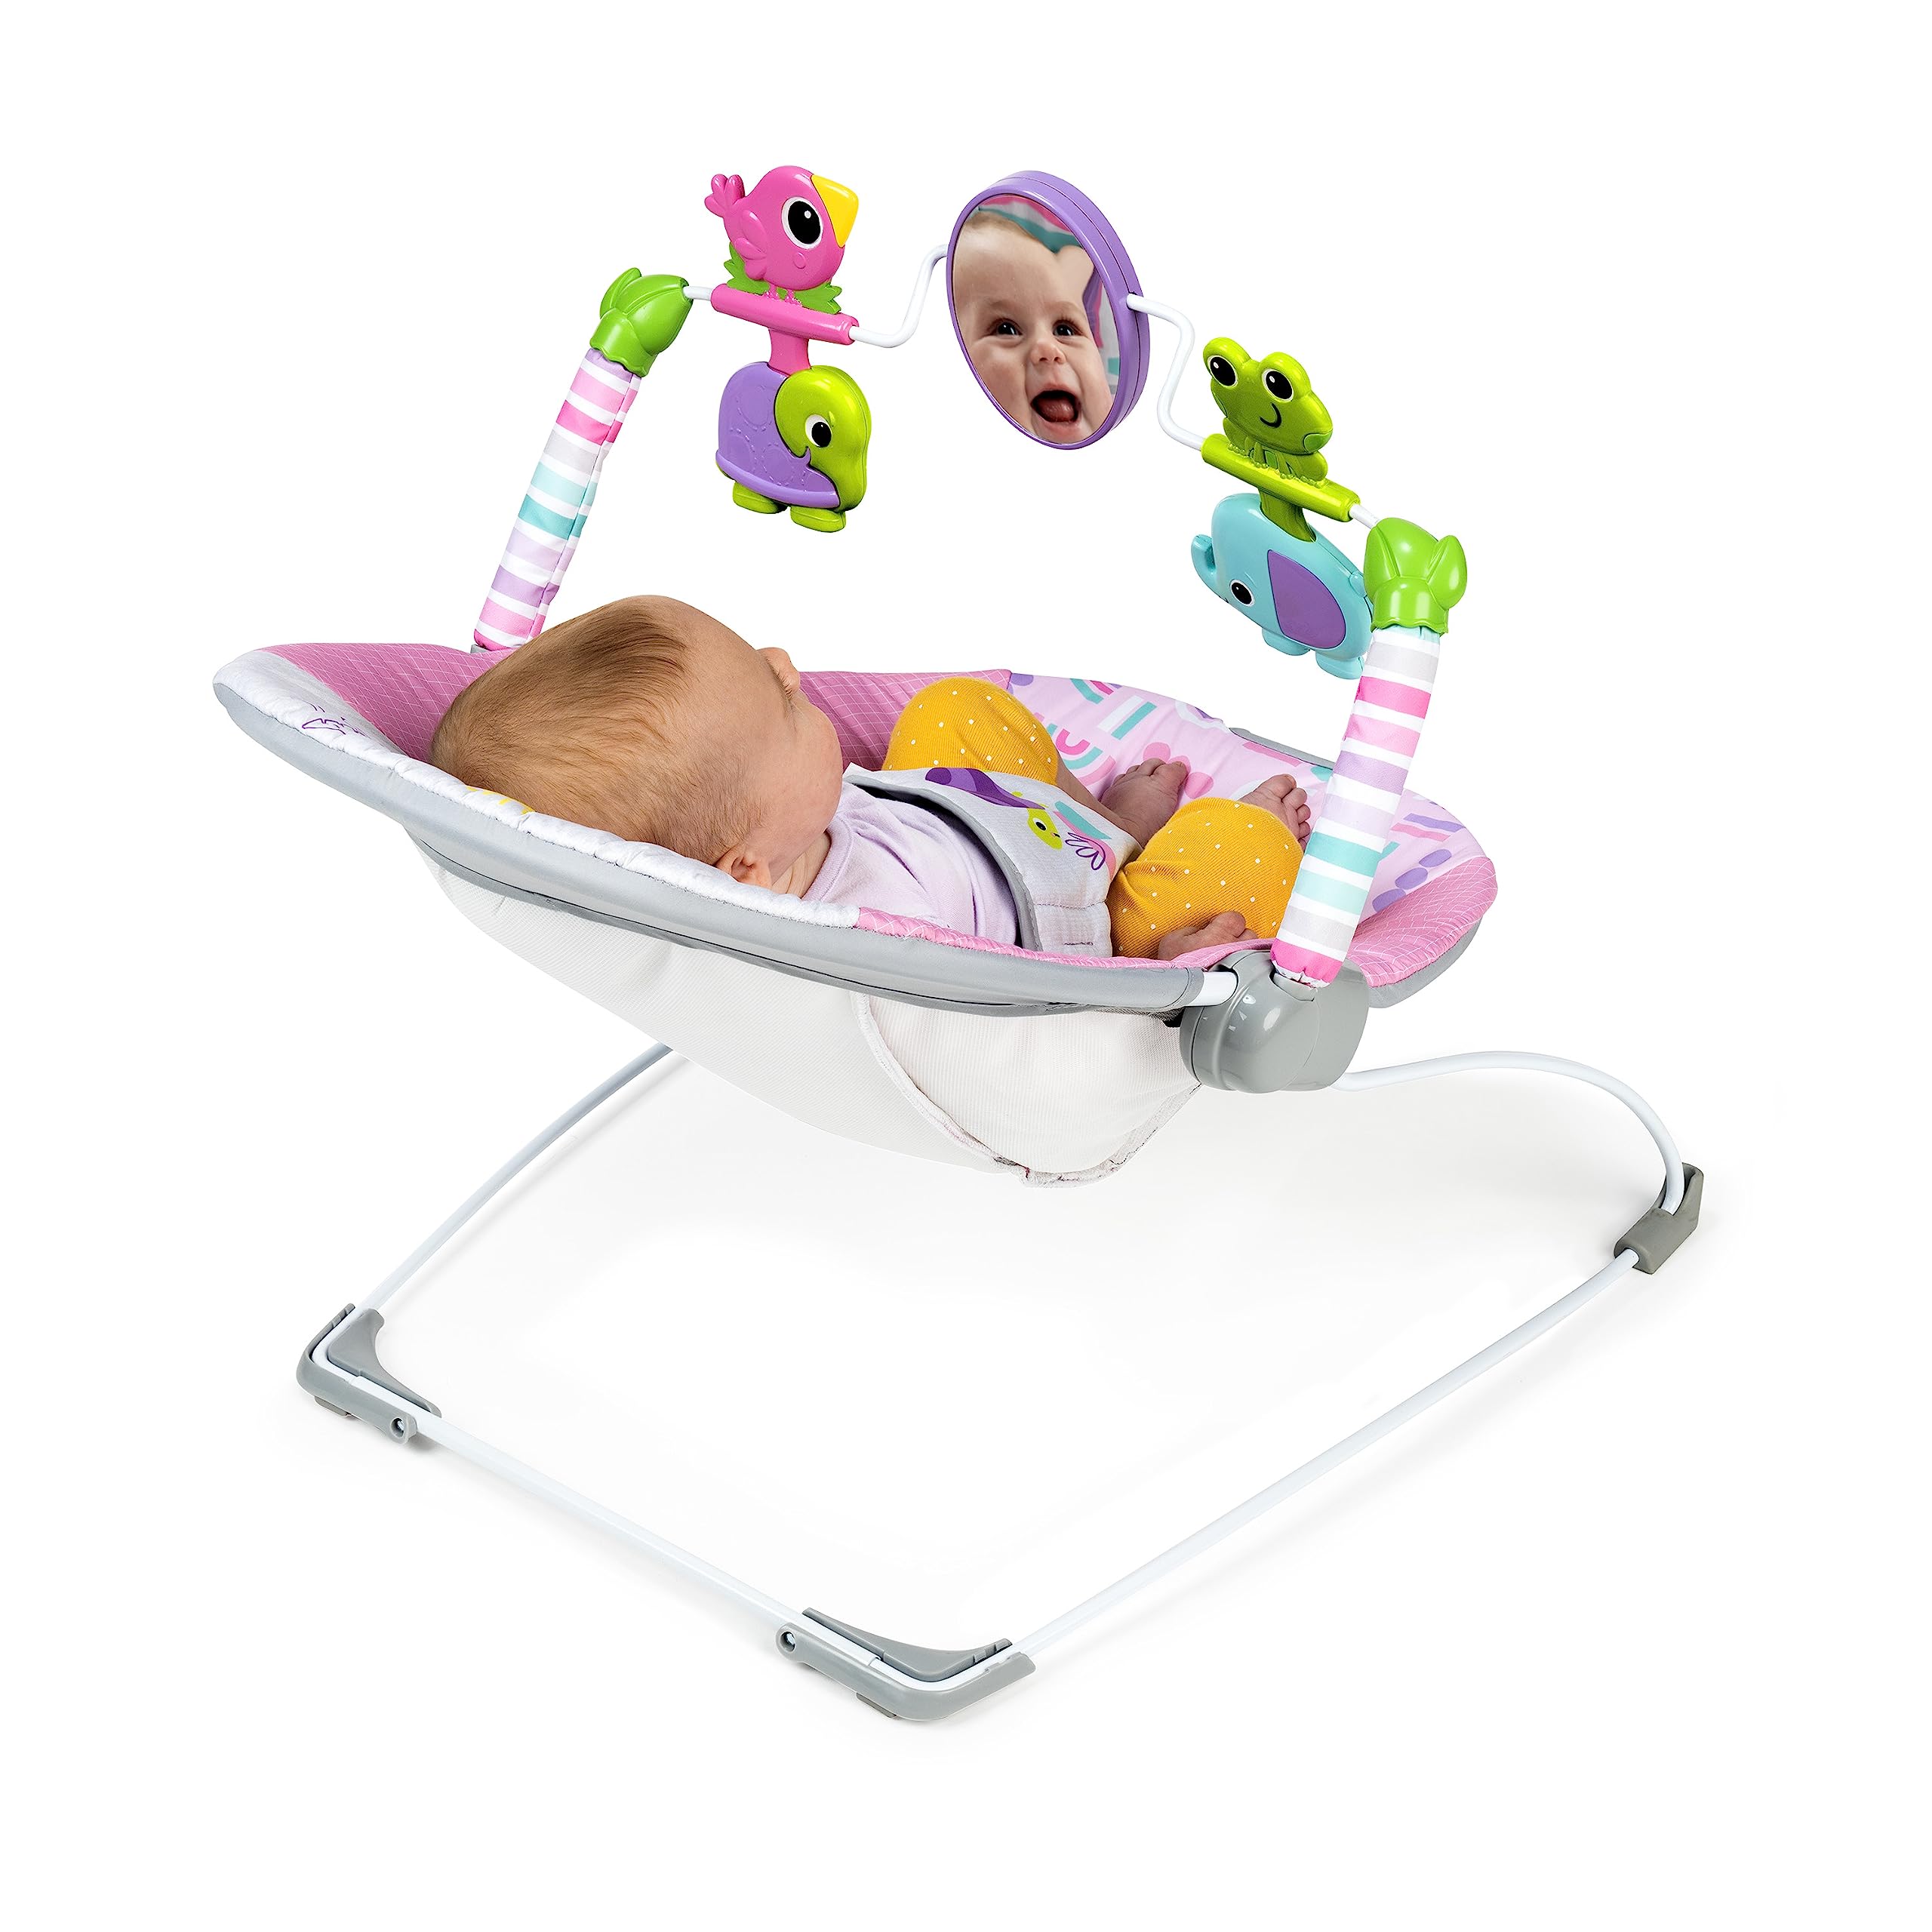 Bright Starts Pink Paradise Portable Baby Bouncer with Vibrating Infant Seat and -Toy Bar, Max Weight 20 lbs., Age 0-6 Months